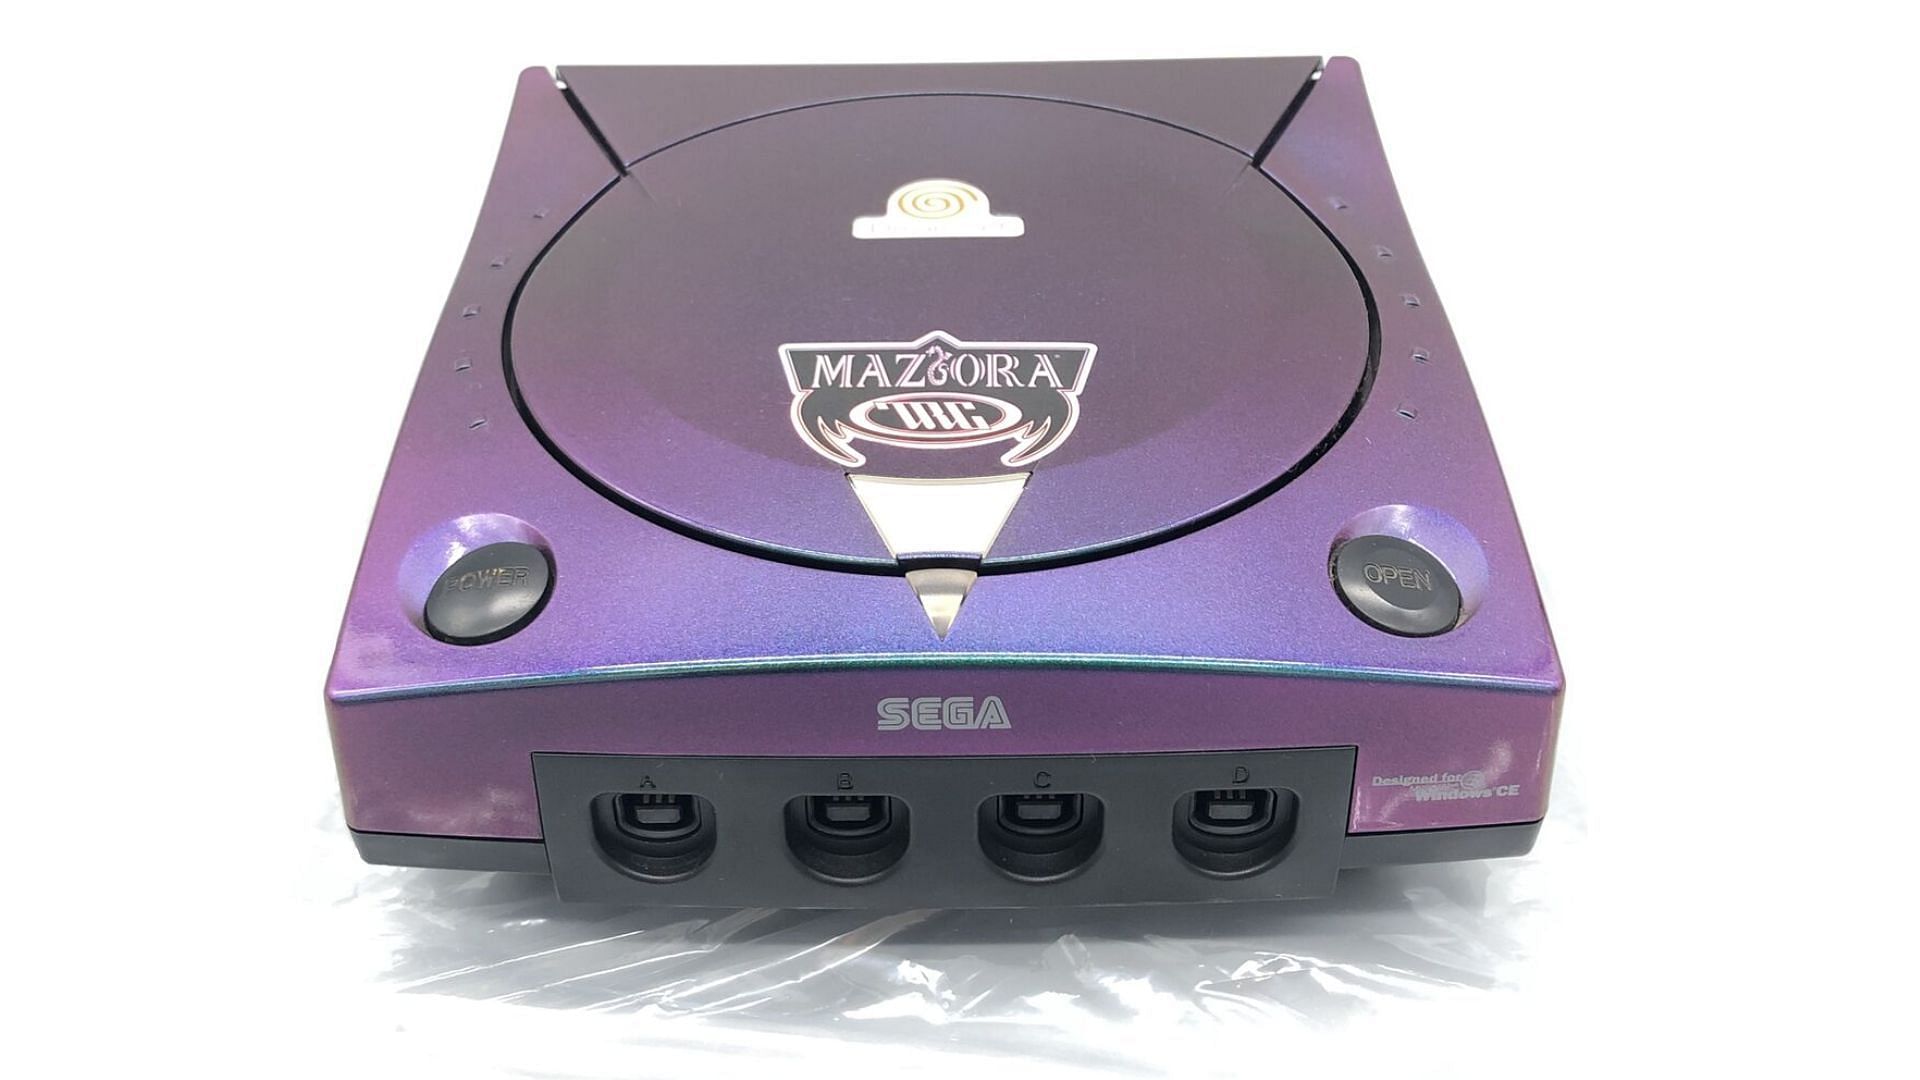 Coolest video game console to get now (Image via eBay/Sega)